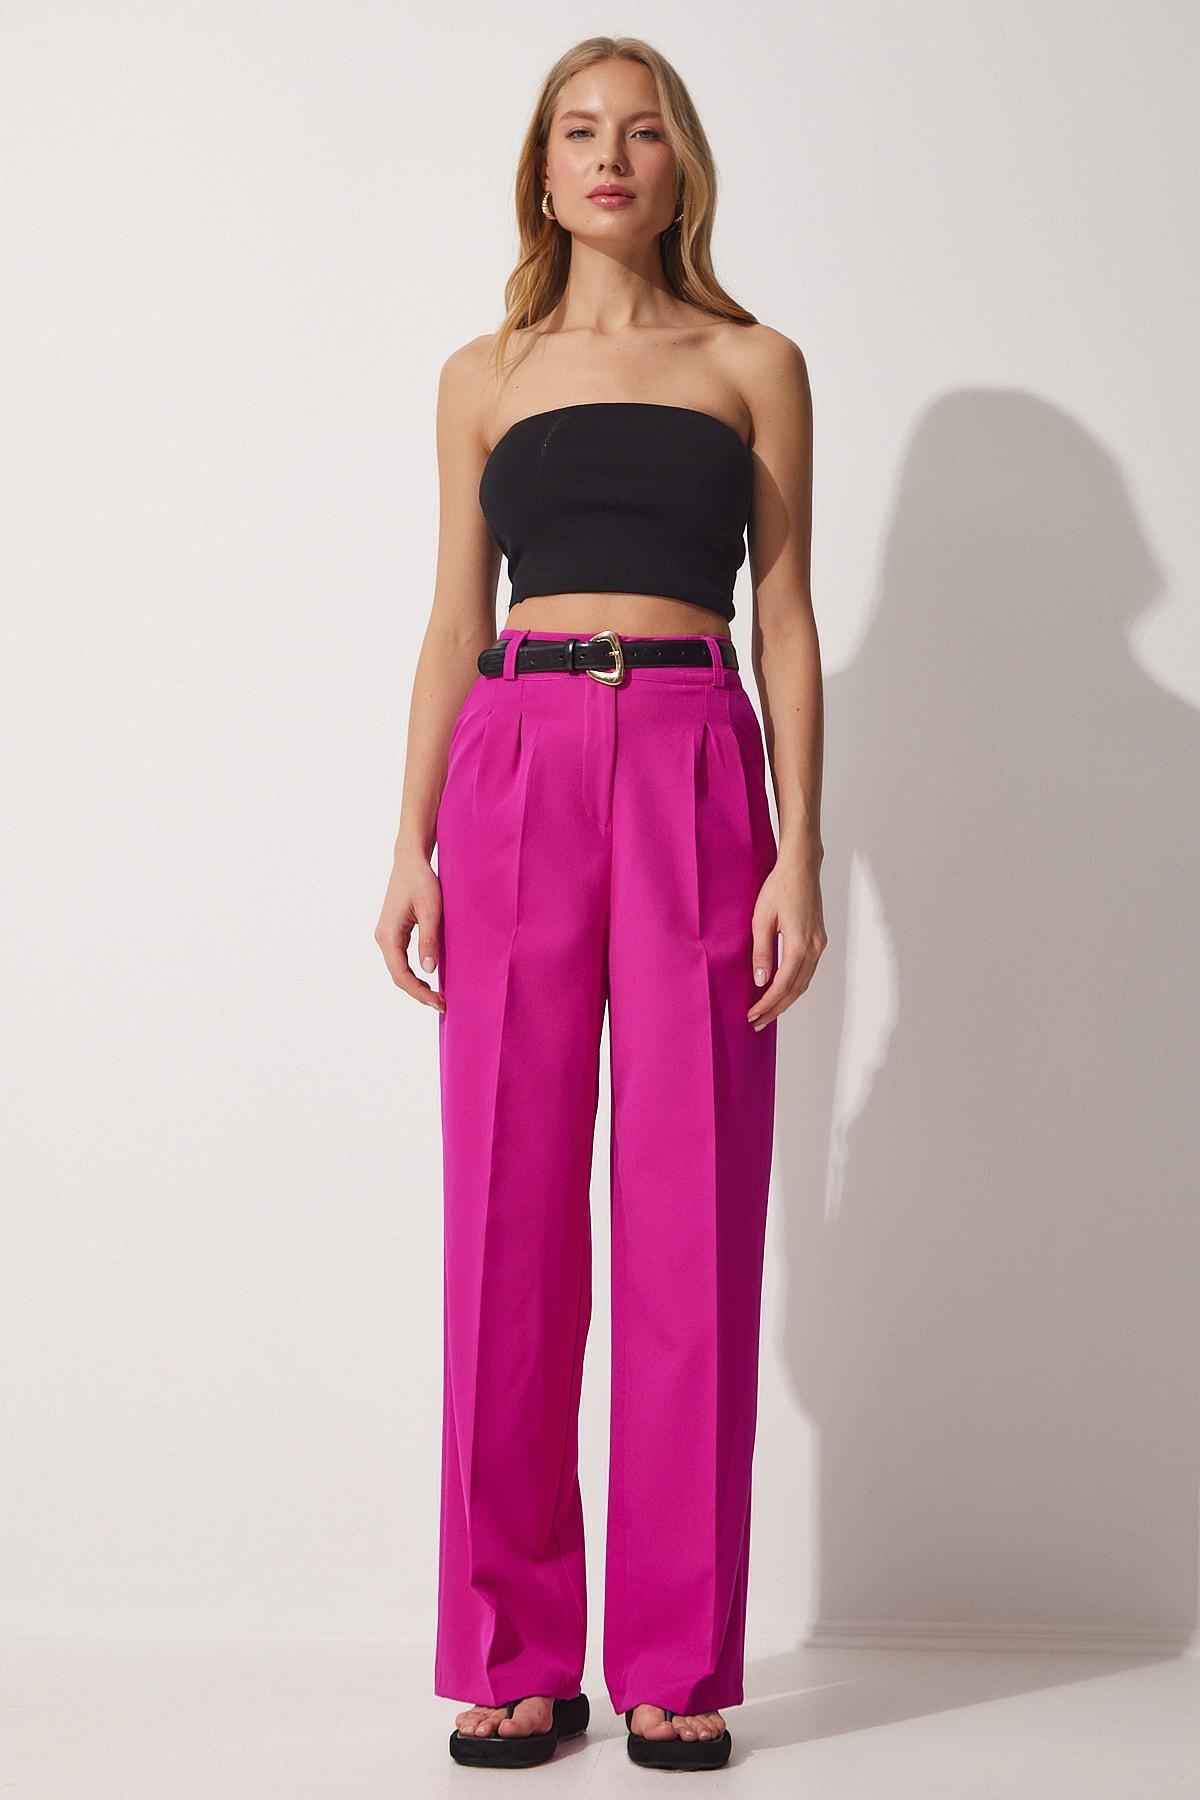 Happiness Istanbul - Pink Straight Pants